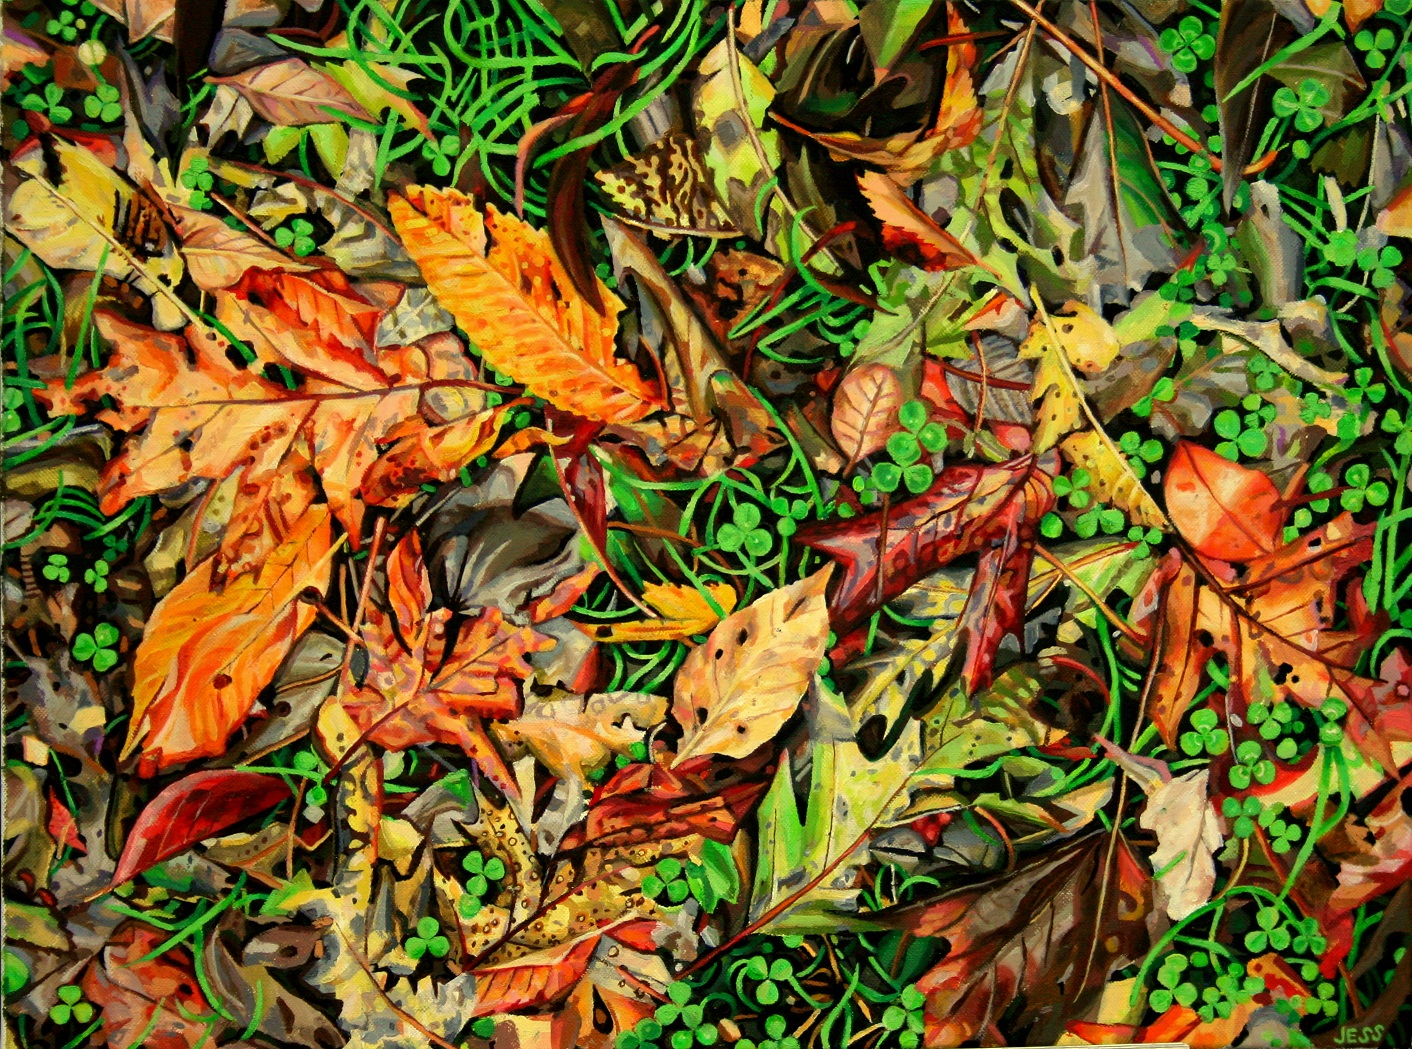 Clovers and Fall Leaves, oil on canvas, 24x18 in, Jessica Siemens 2011